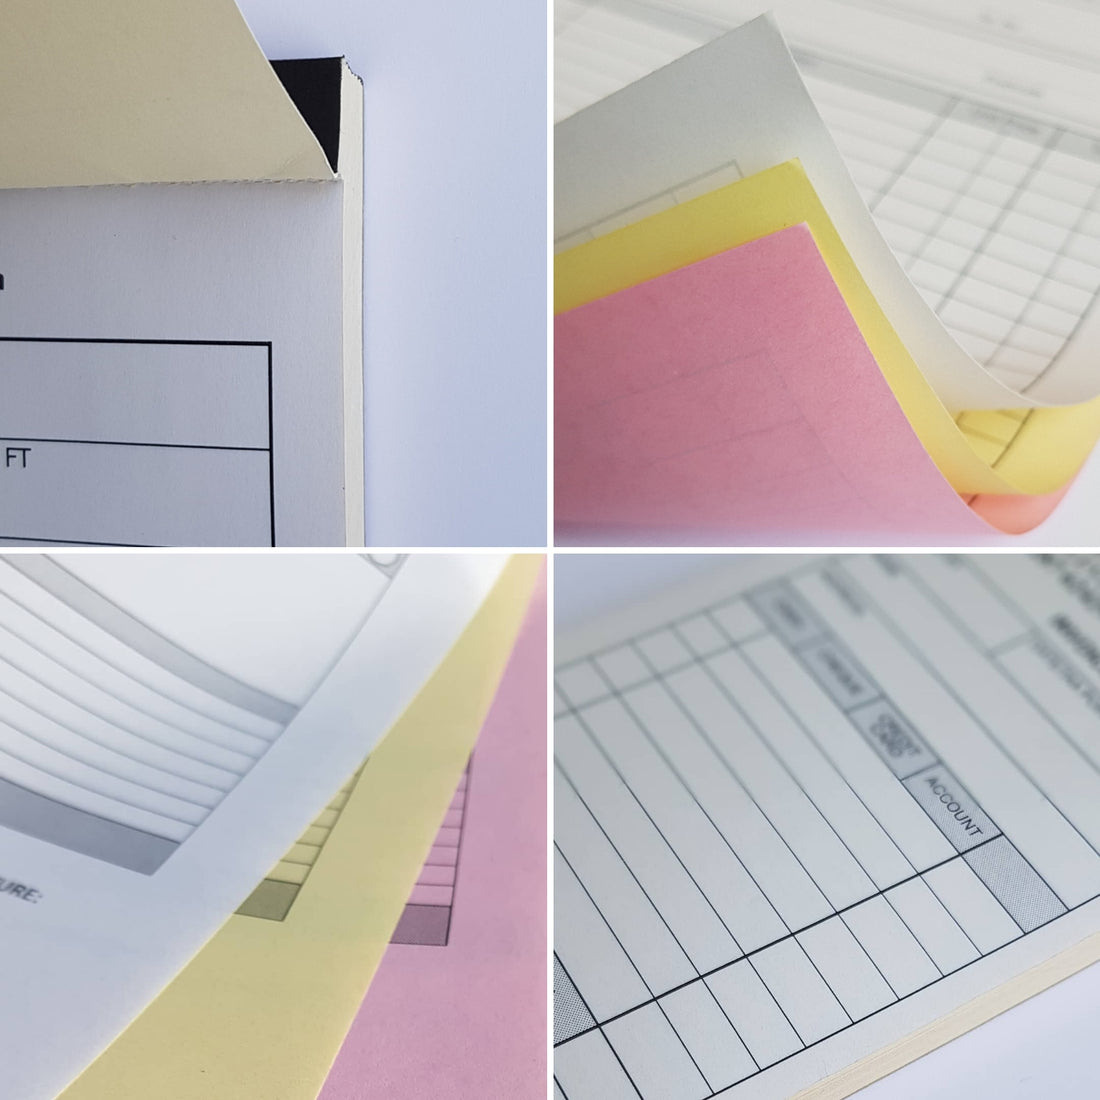 Carbonless Business Forms Made to Order by MD Print Shop